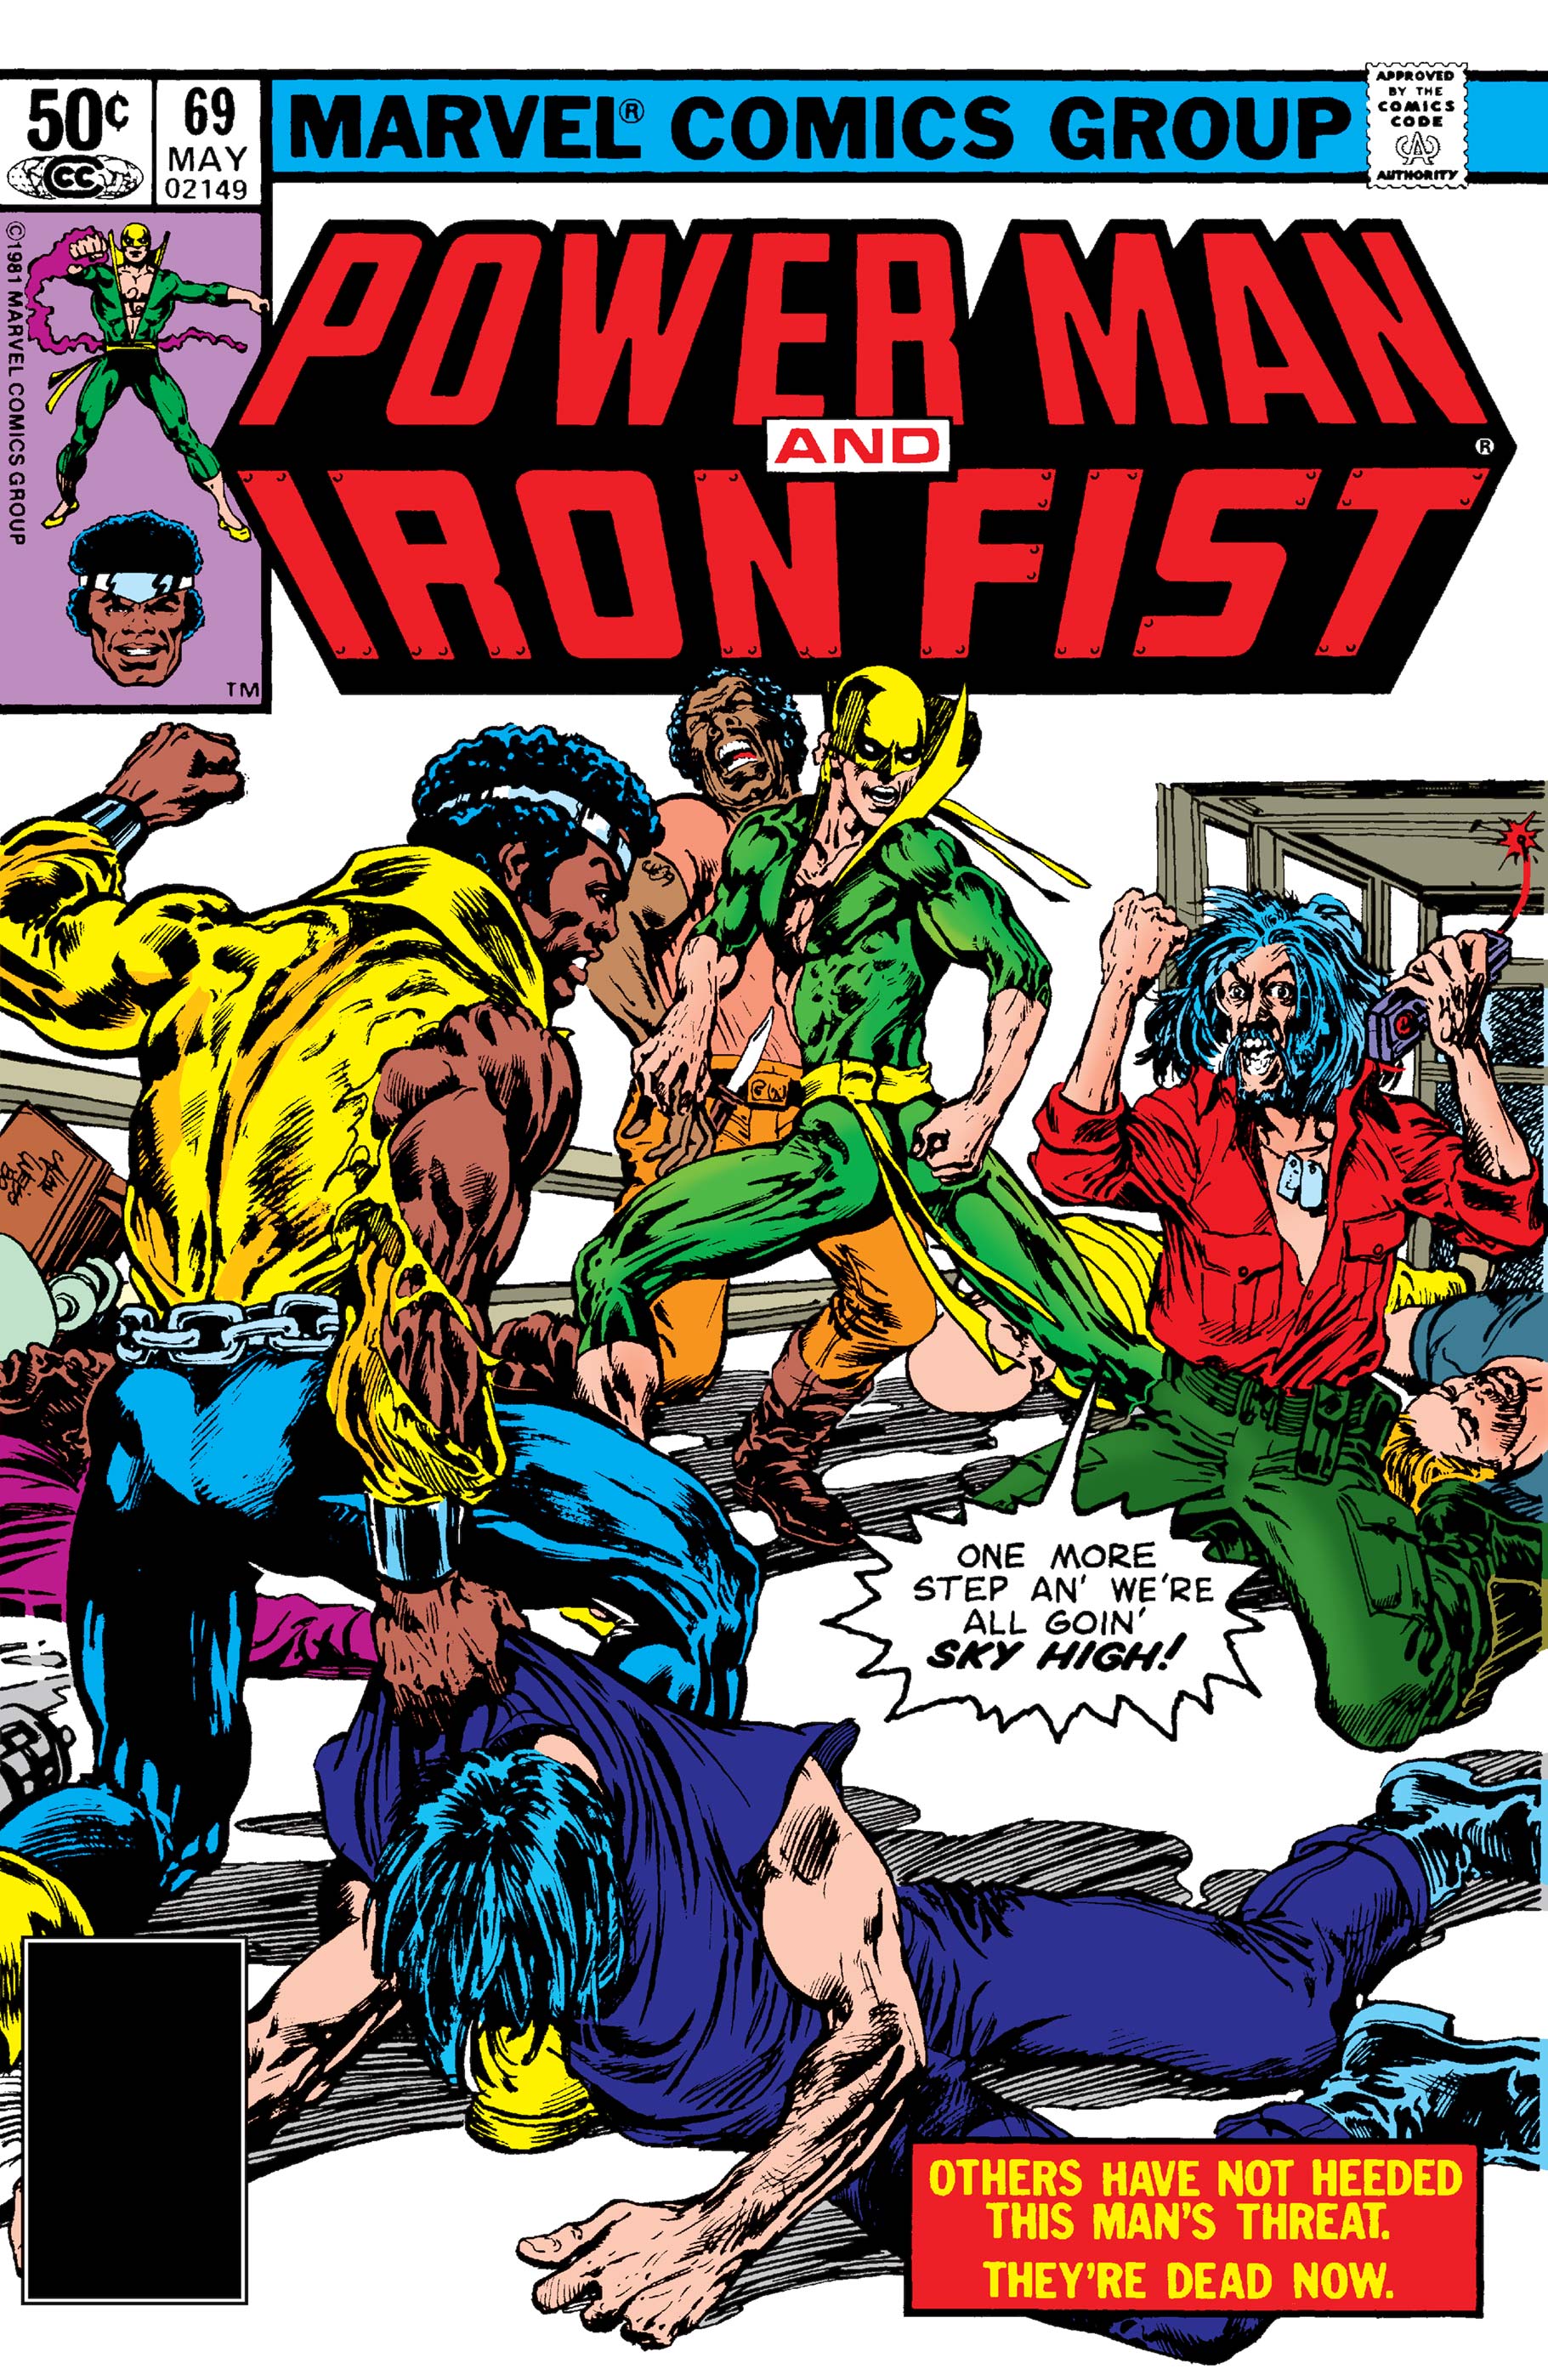 Power Man and Iron Fist (1978) #69